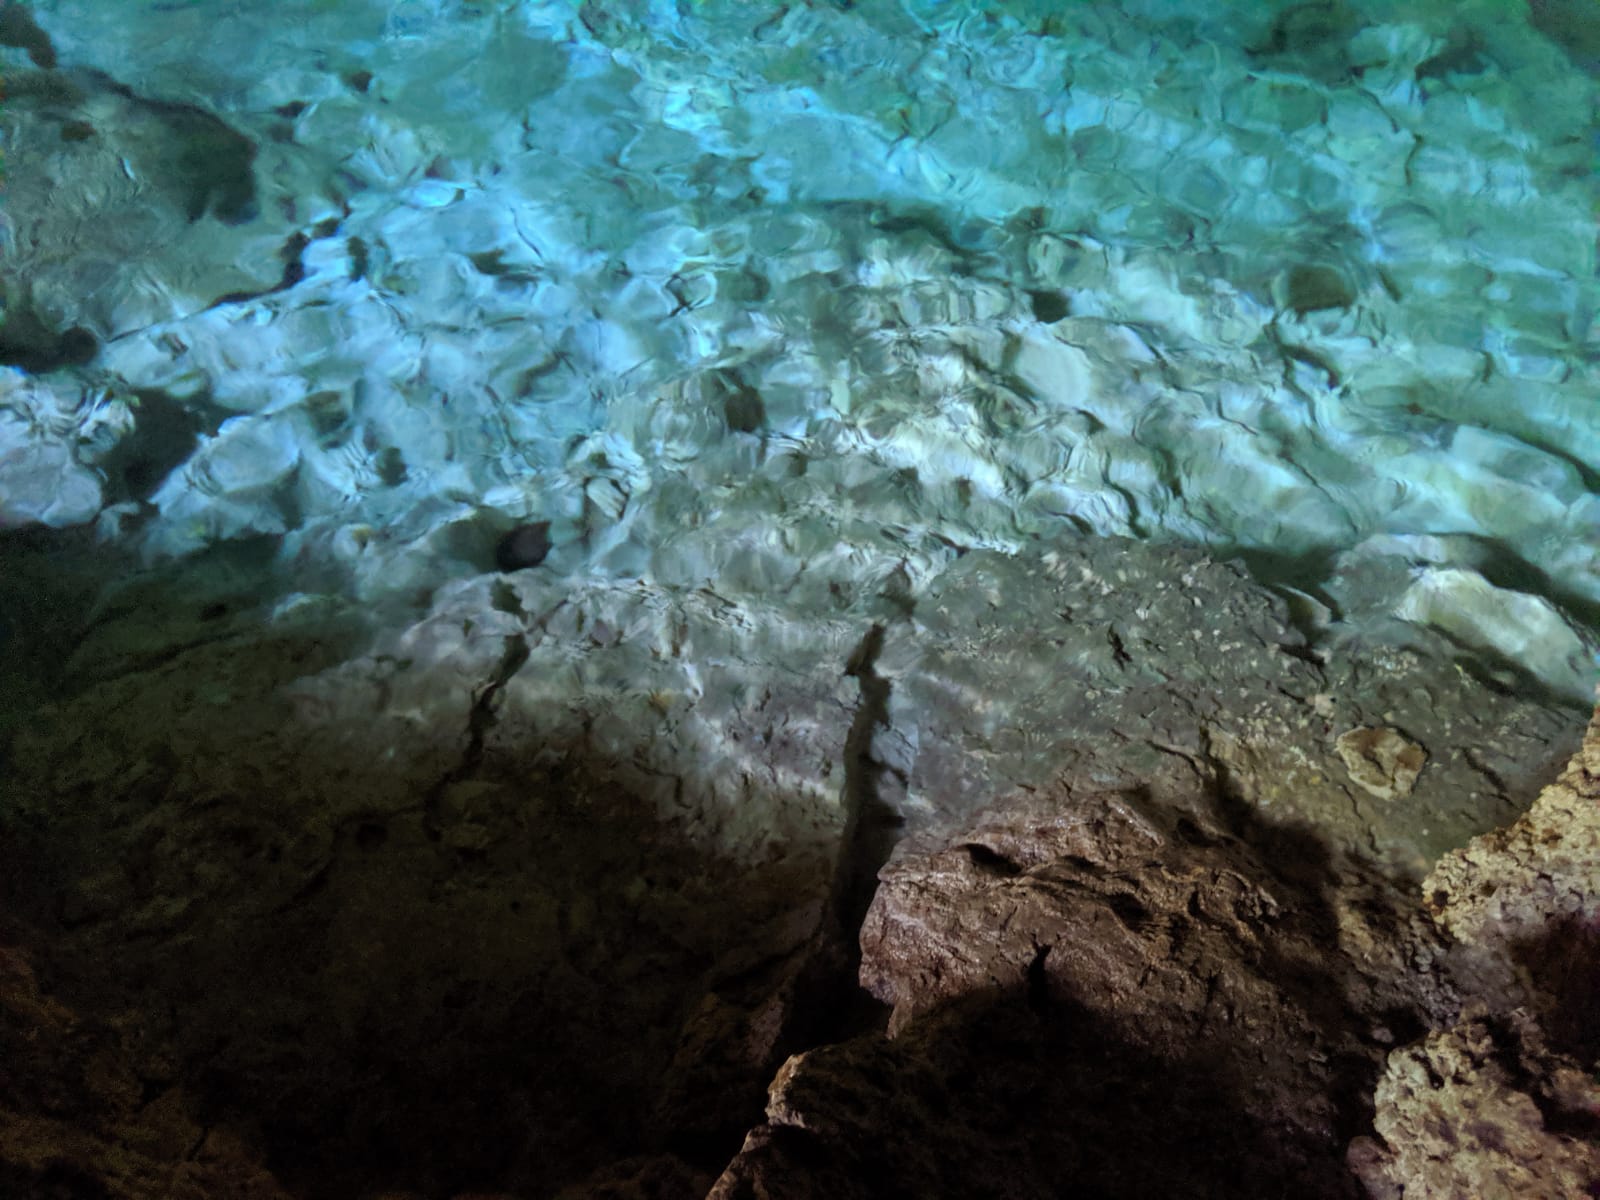 A pool of crystal clear water in an underground cave